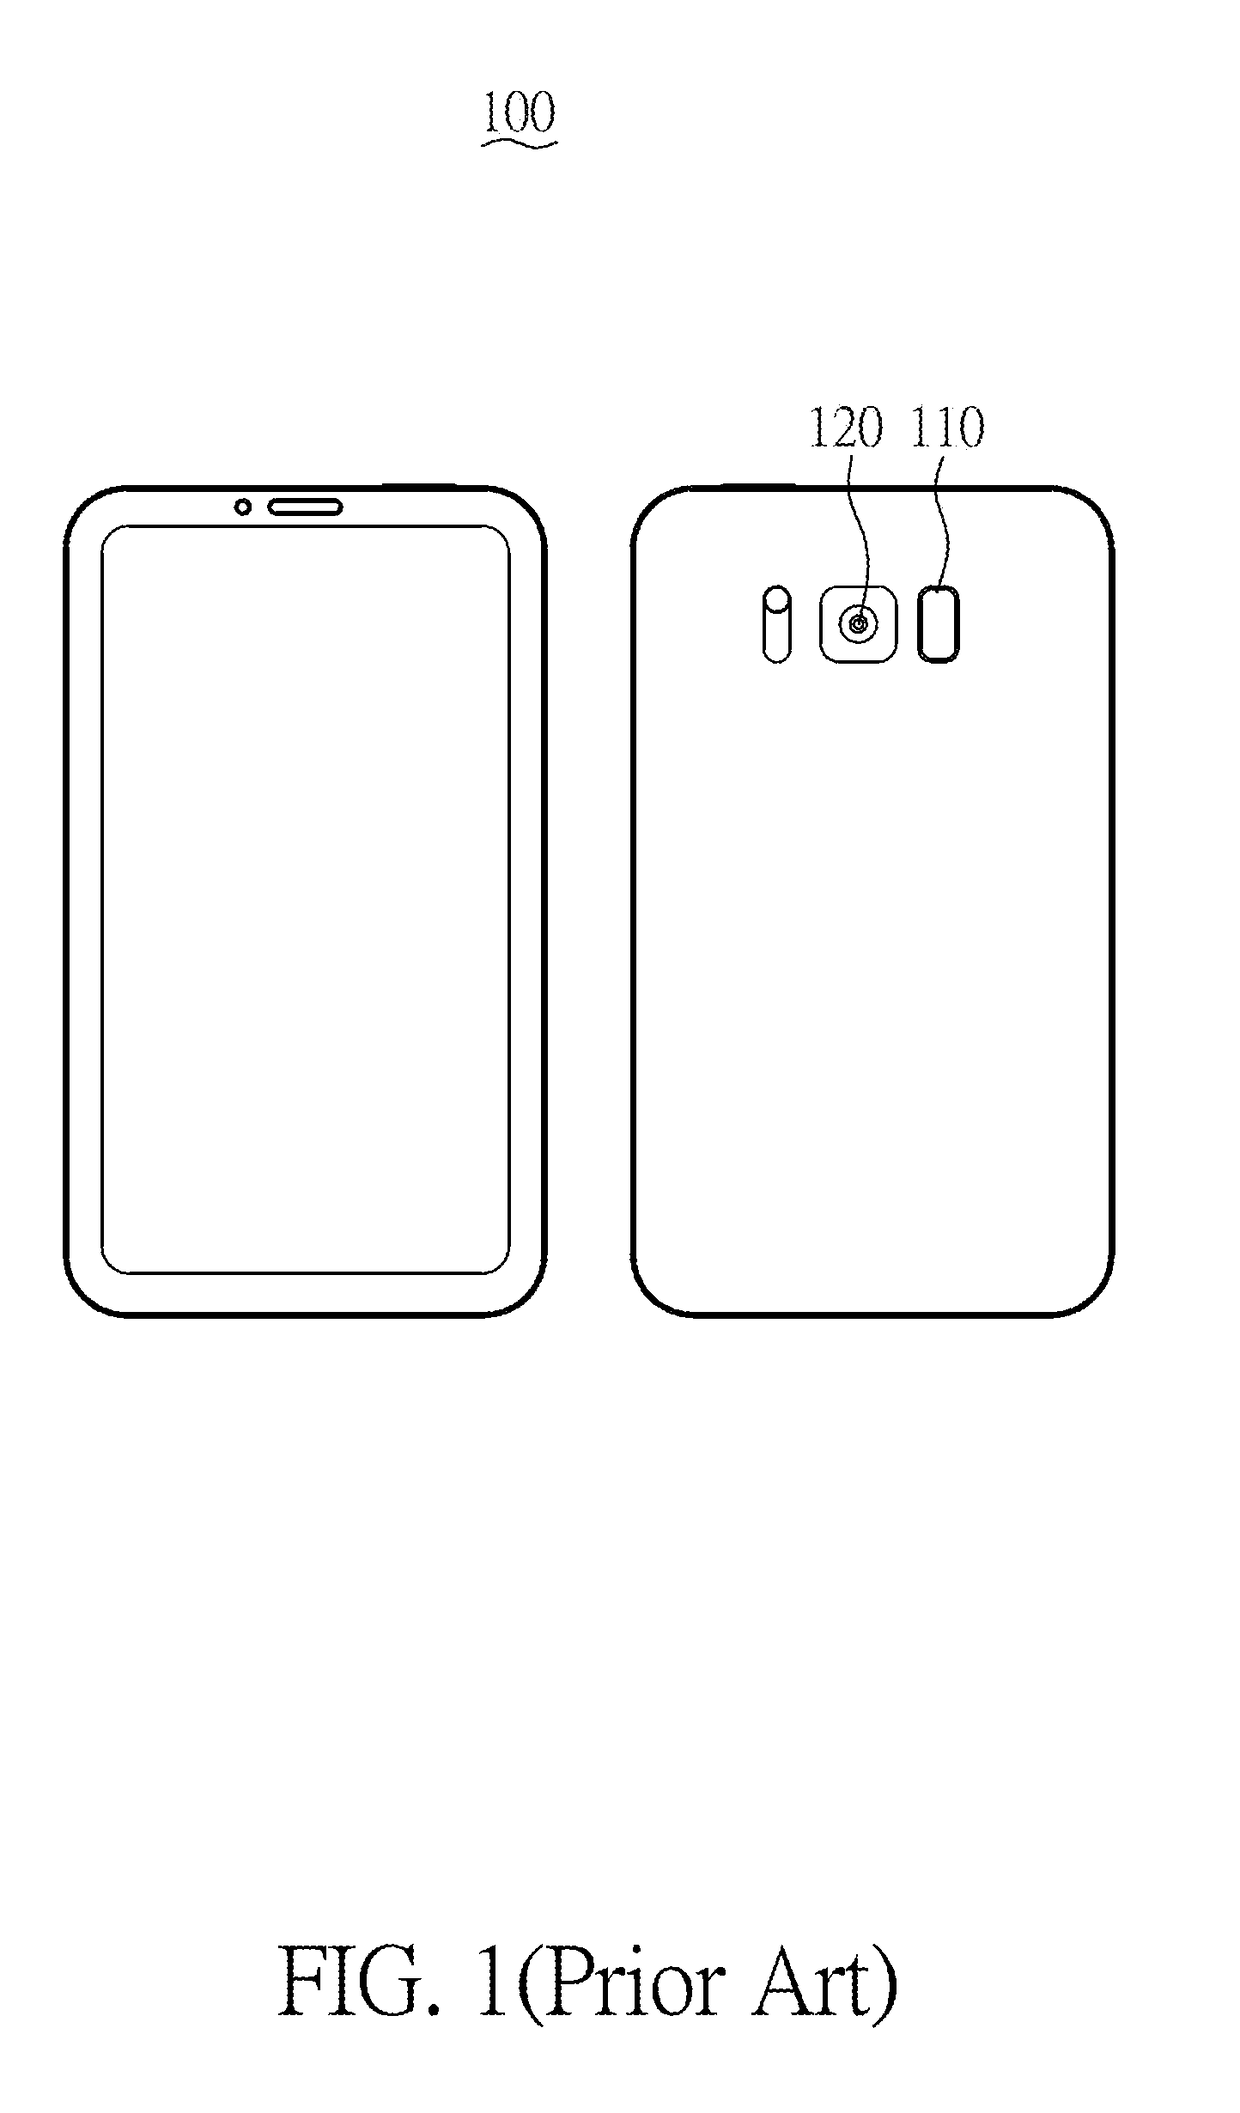 High screen ratio display device with fingerprint identification